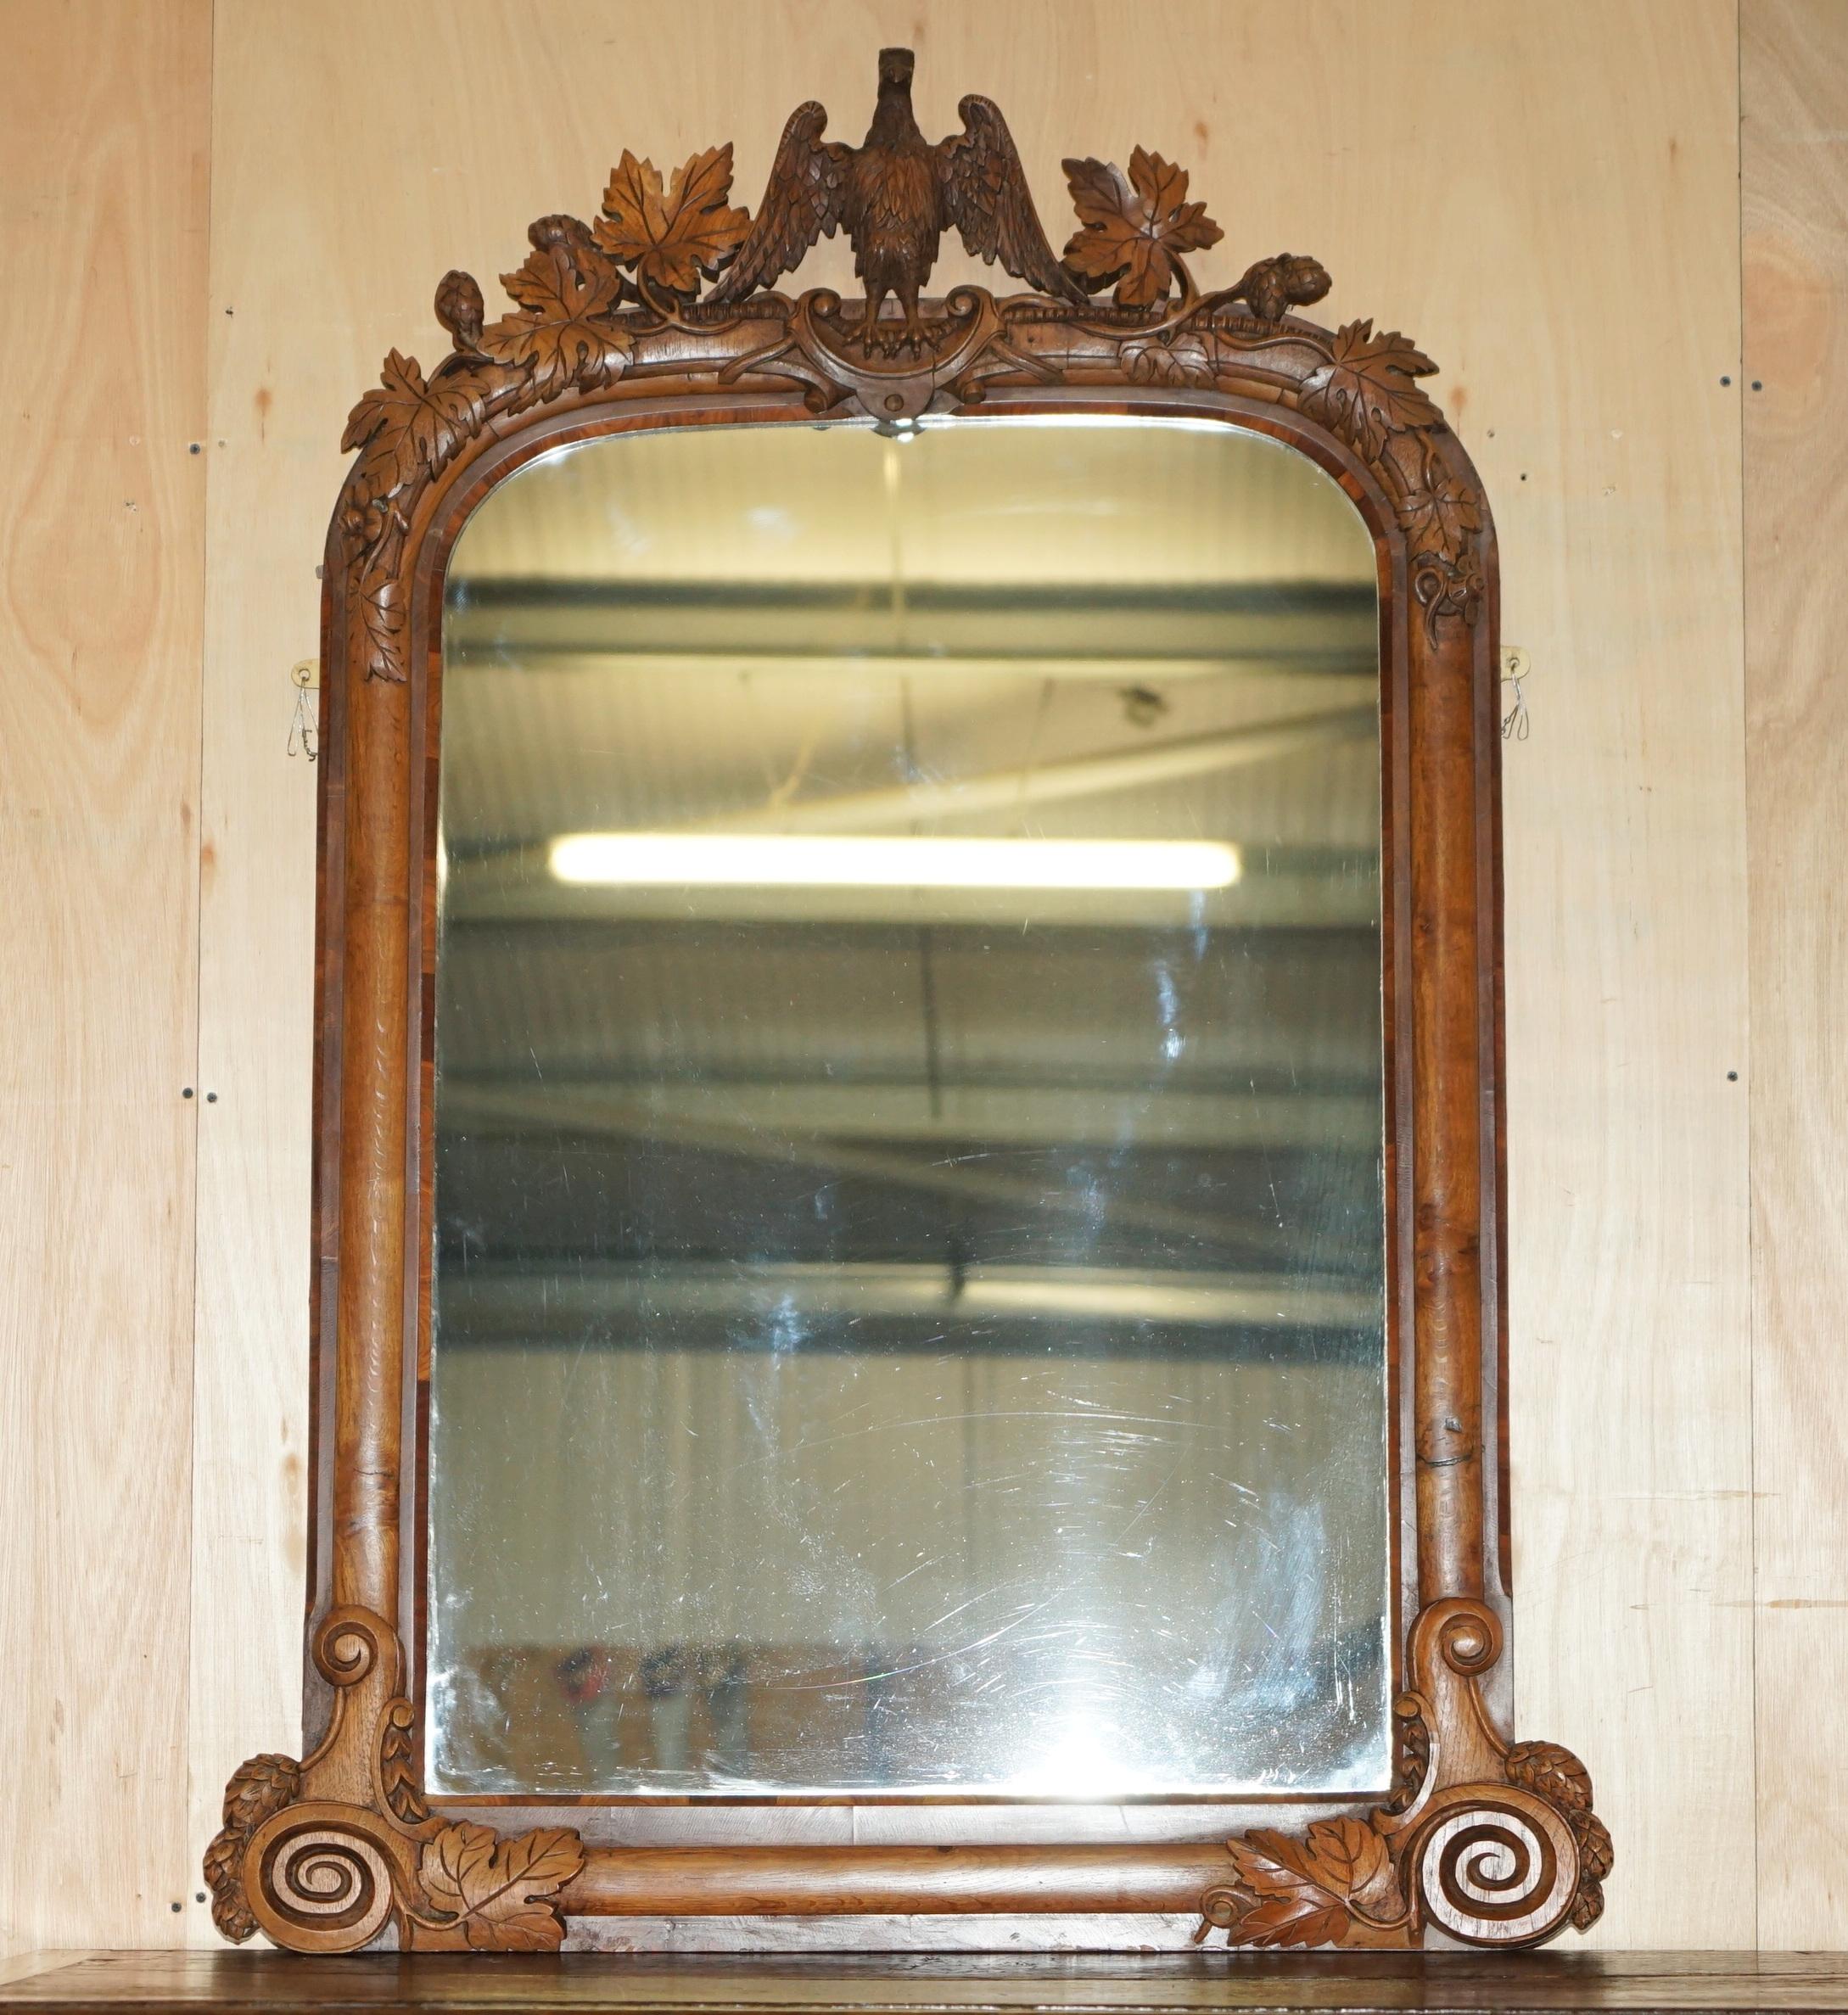 Royal House Antiques

Royal House Antiques is delighted to offer for sale this stunning circa 1860-1880 hand carved Walnut framed overmantel mirror with large American Eagle to the top

Please note the delivery fee listed is just a guide, it covers